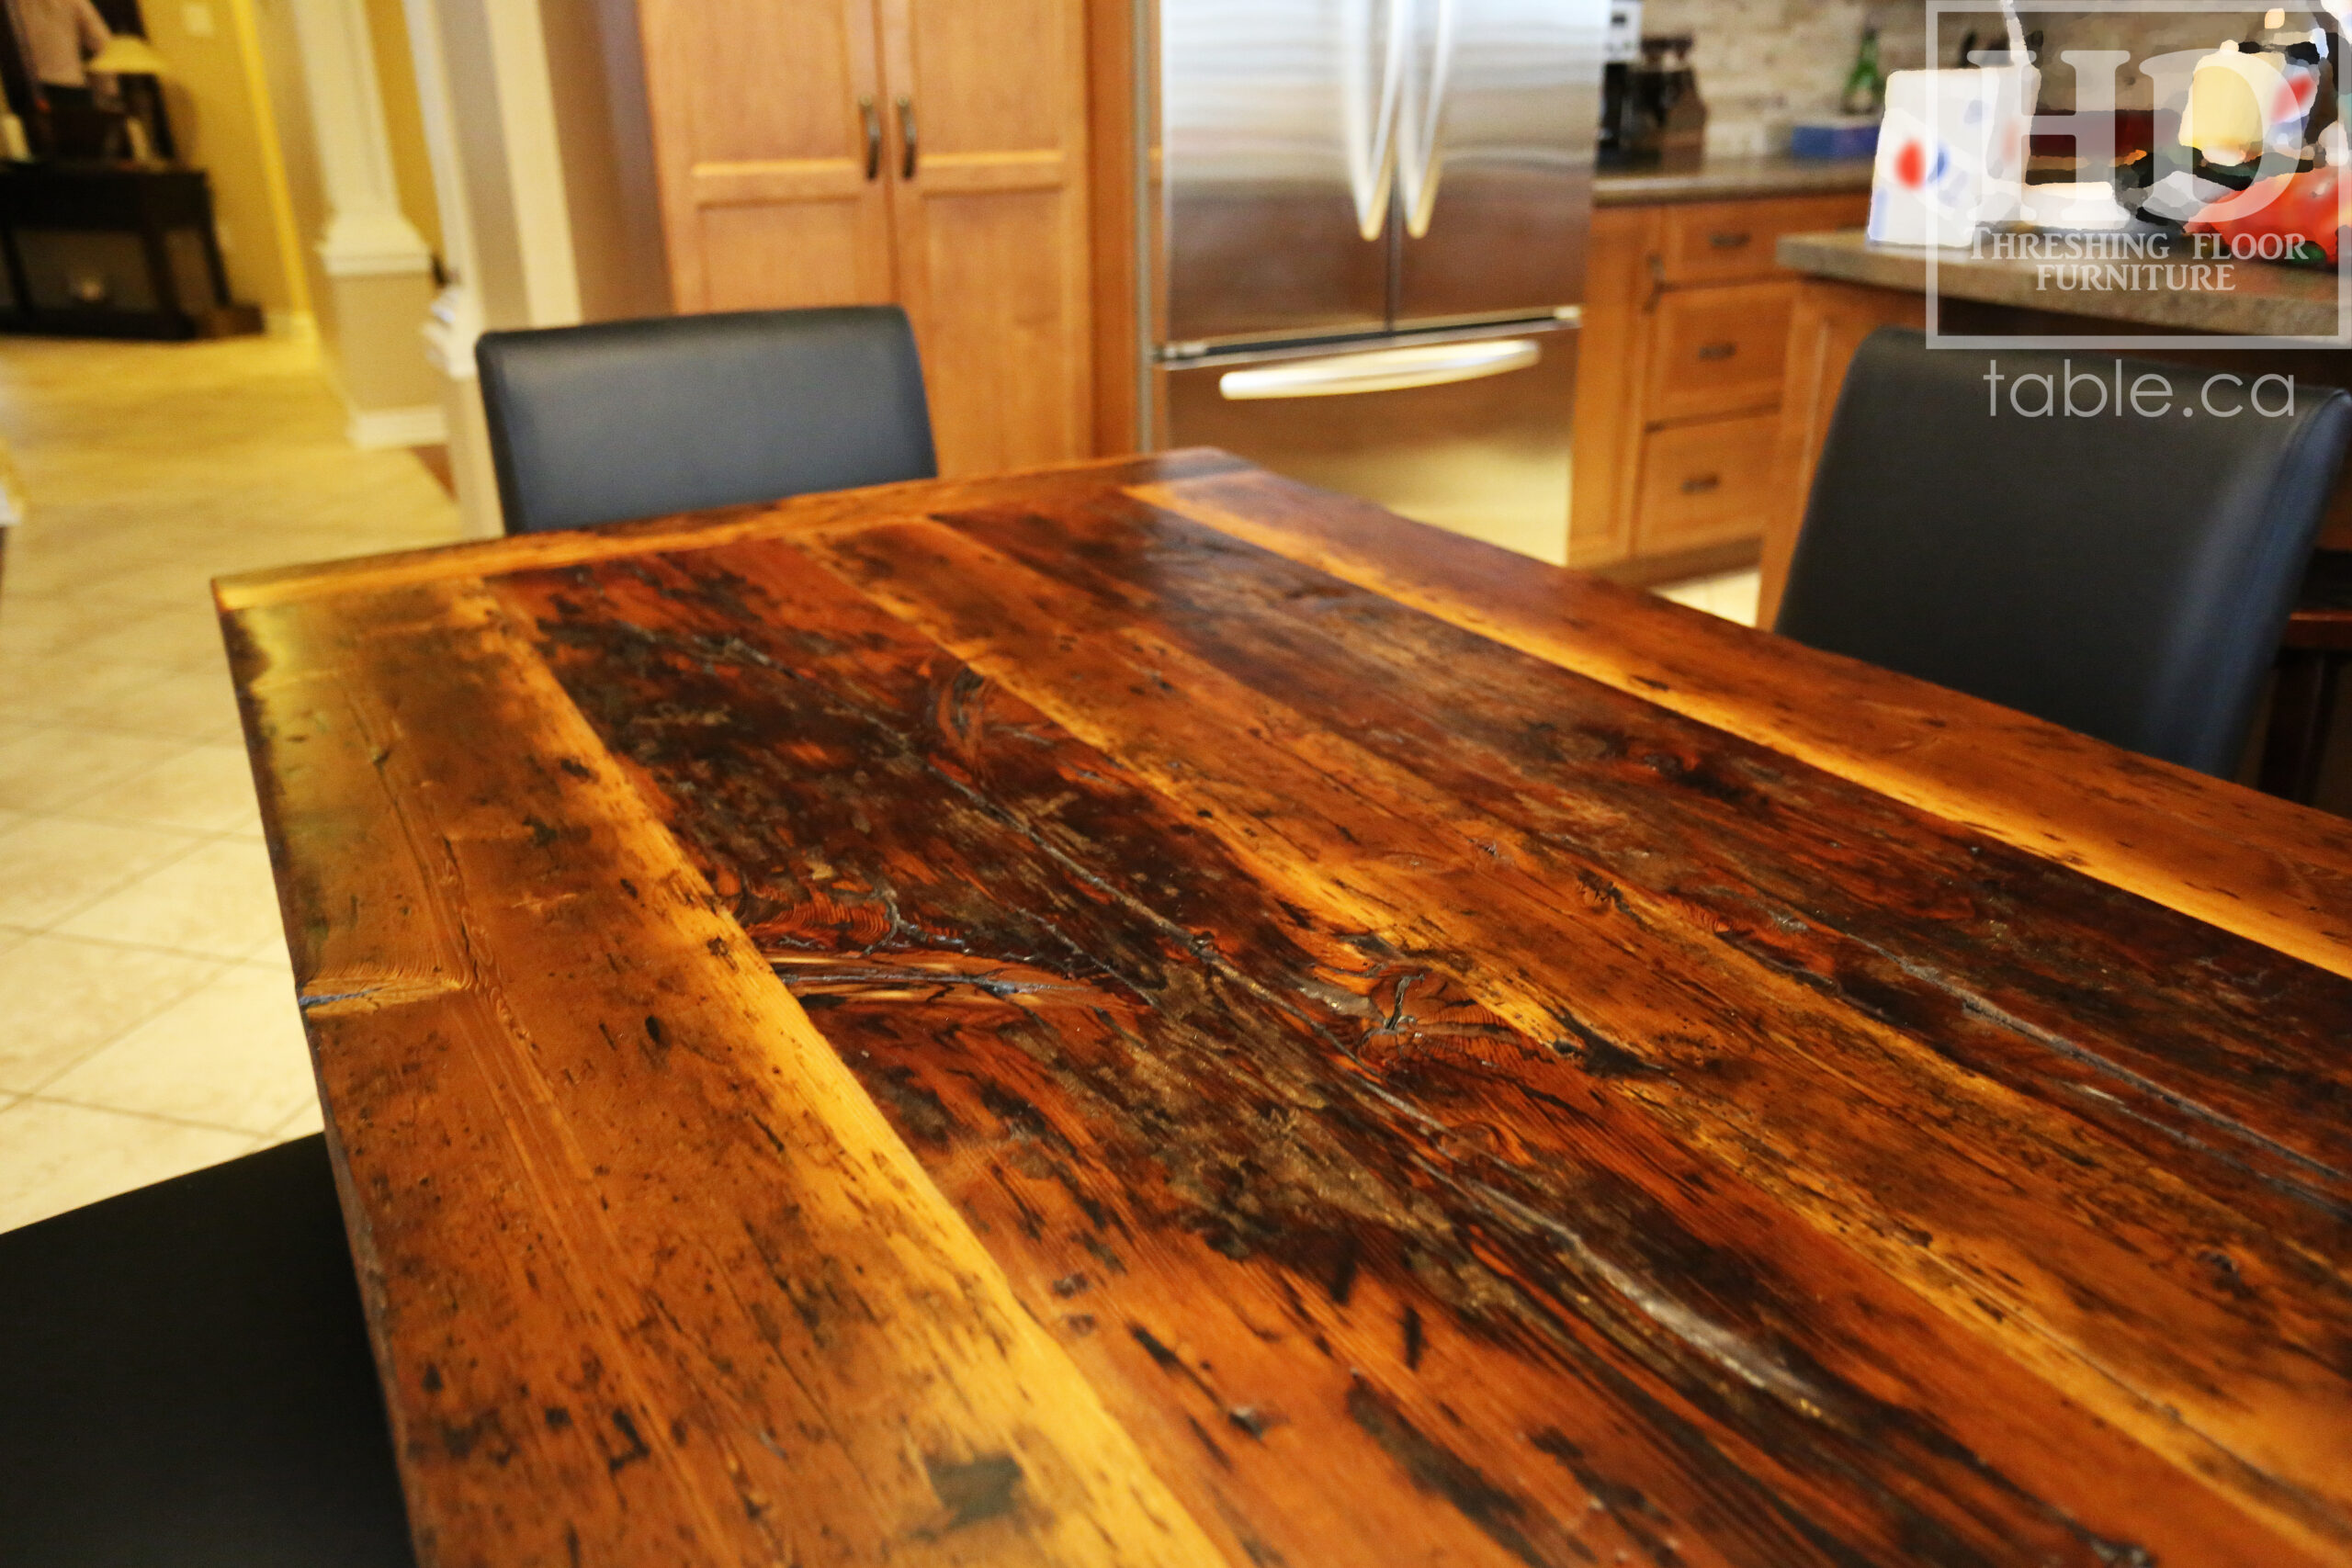 Reclaimed Wood Table with Steel Base by HD Threshing Floor Furniture / www.table.ca